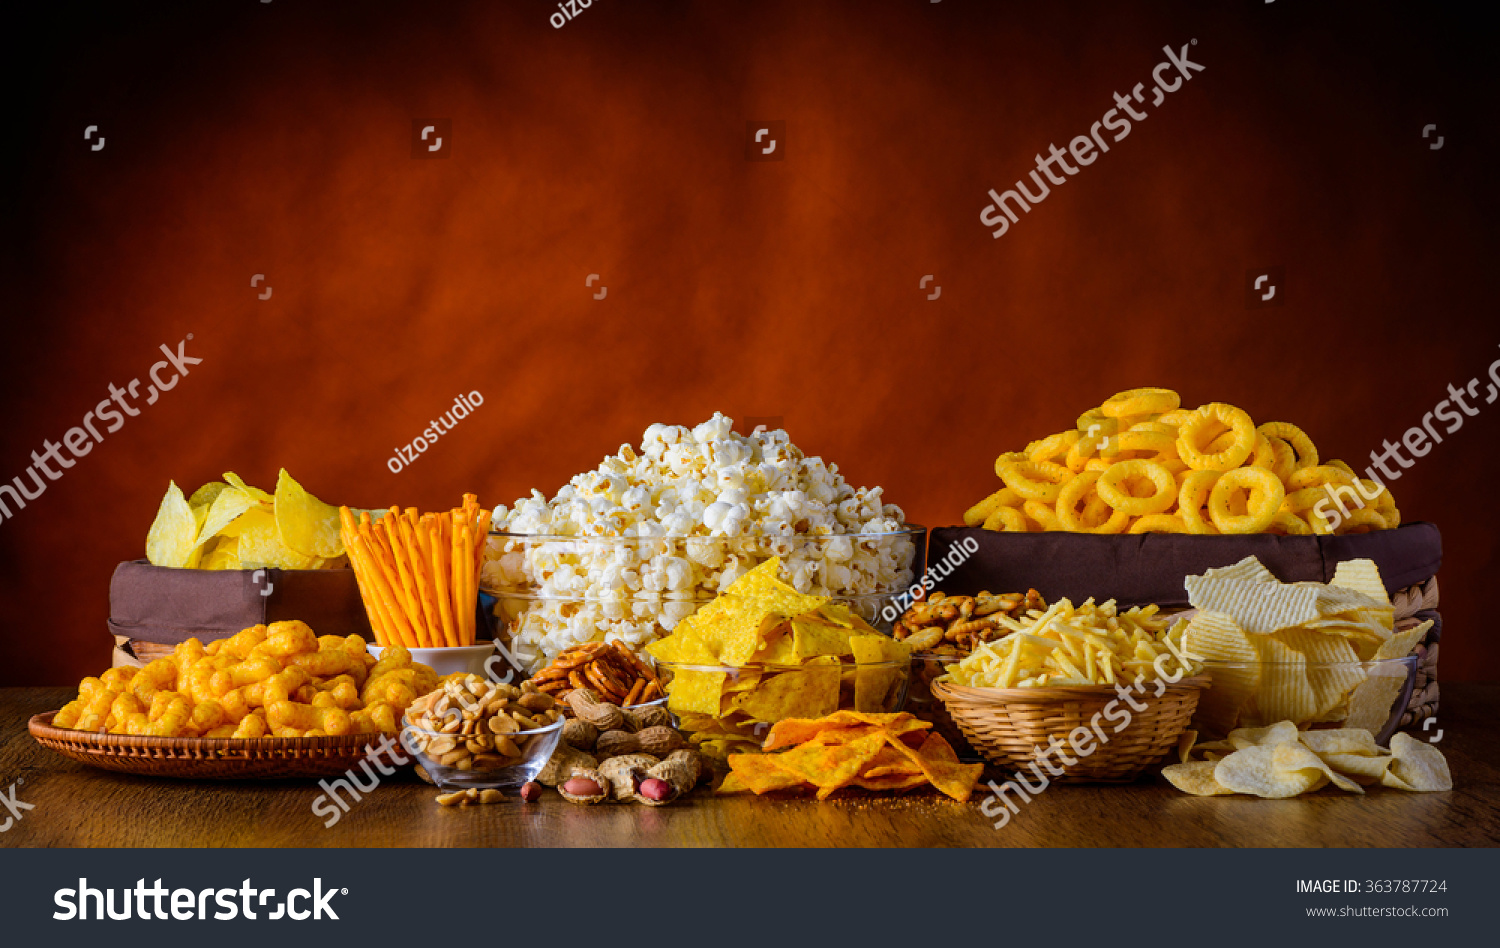 Different types of snacks, chips, nuts and popcorn in still life #363787724